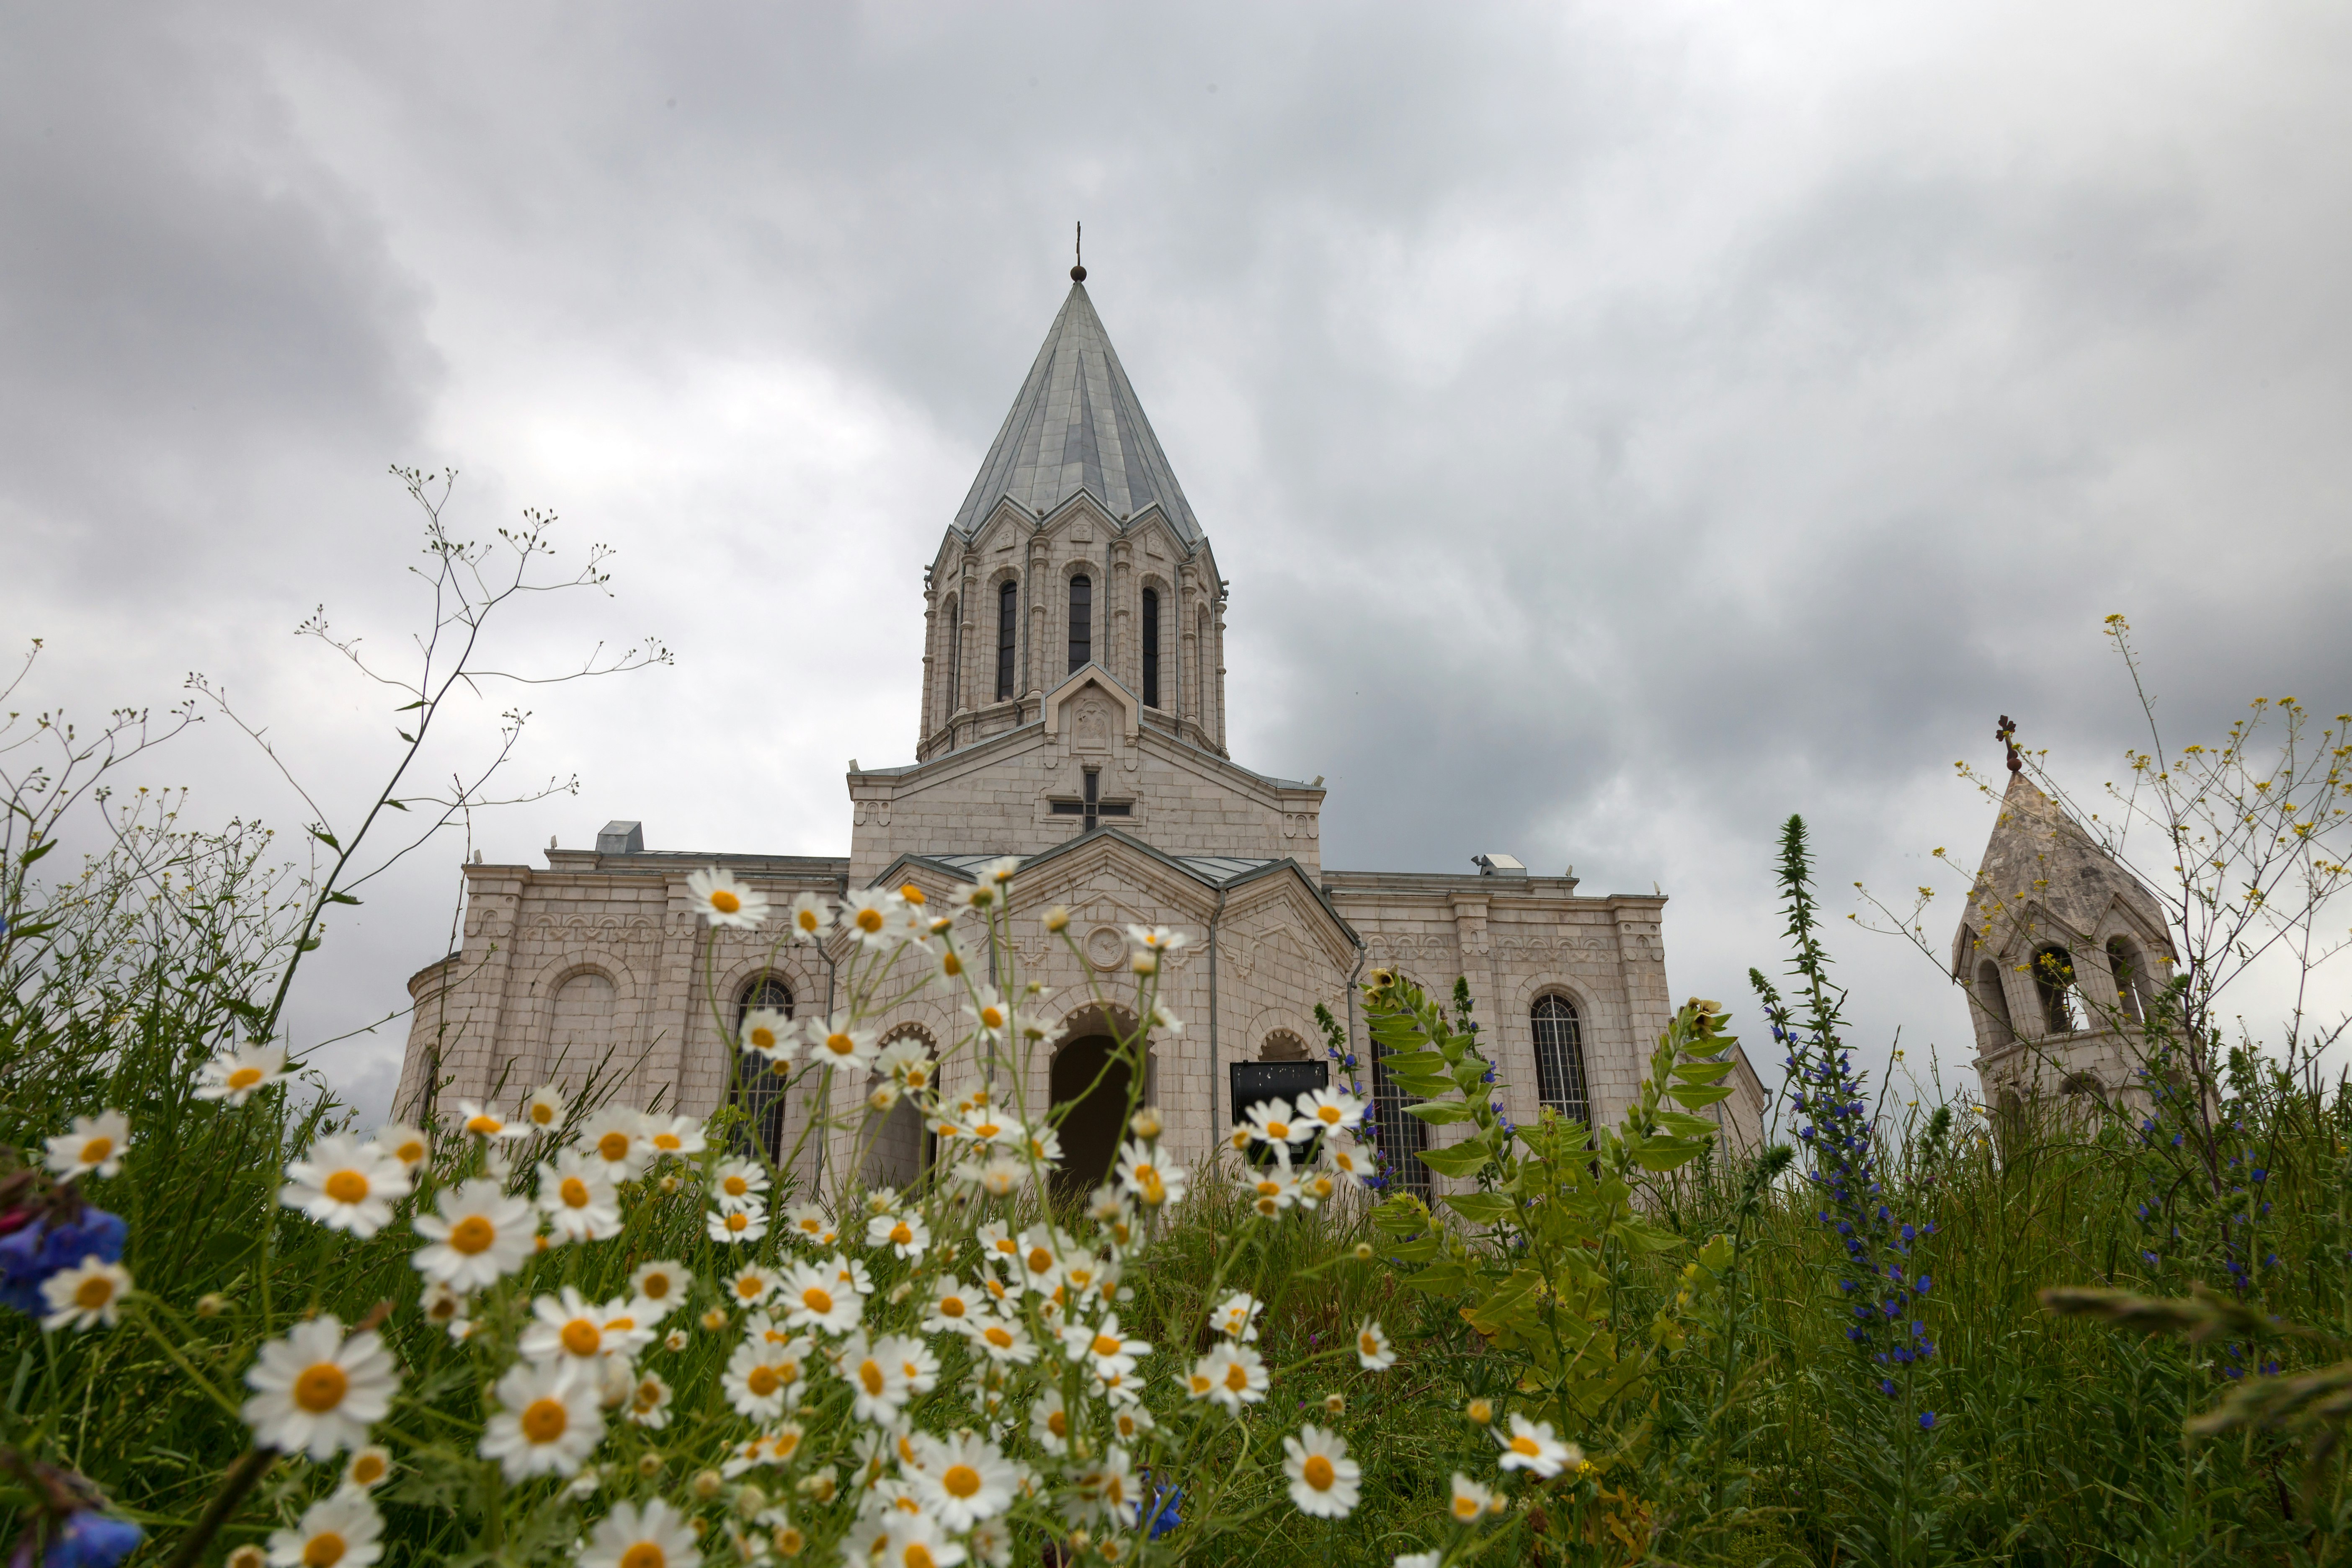 The grey stone exterior of the Ghazanchetsots Cathedral in Shoushi, Artsakh is framed by cloudy skies and a bright patch of chamomile flowers and grass in the immediate foreground 